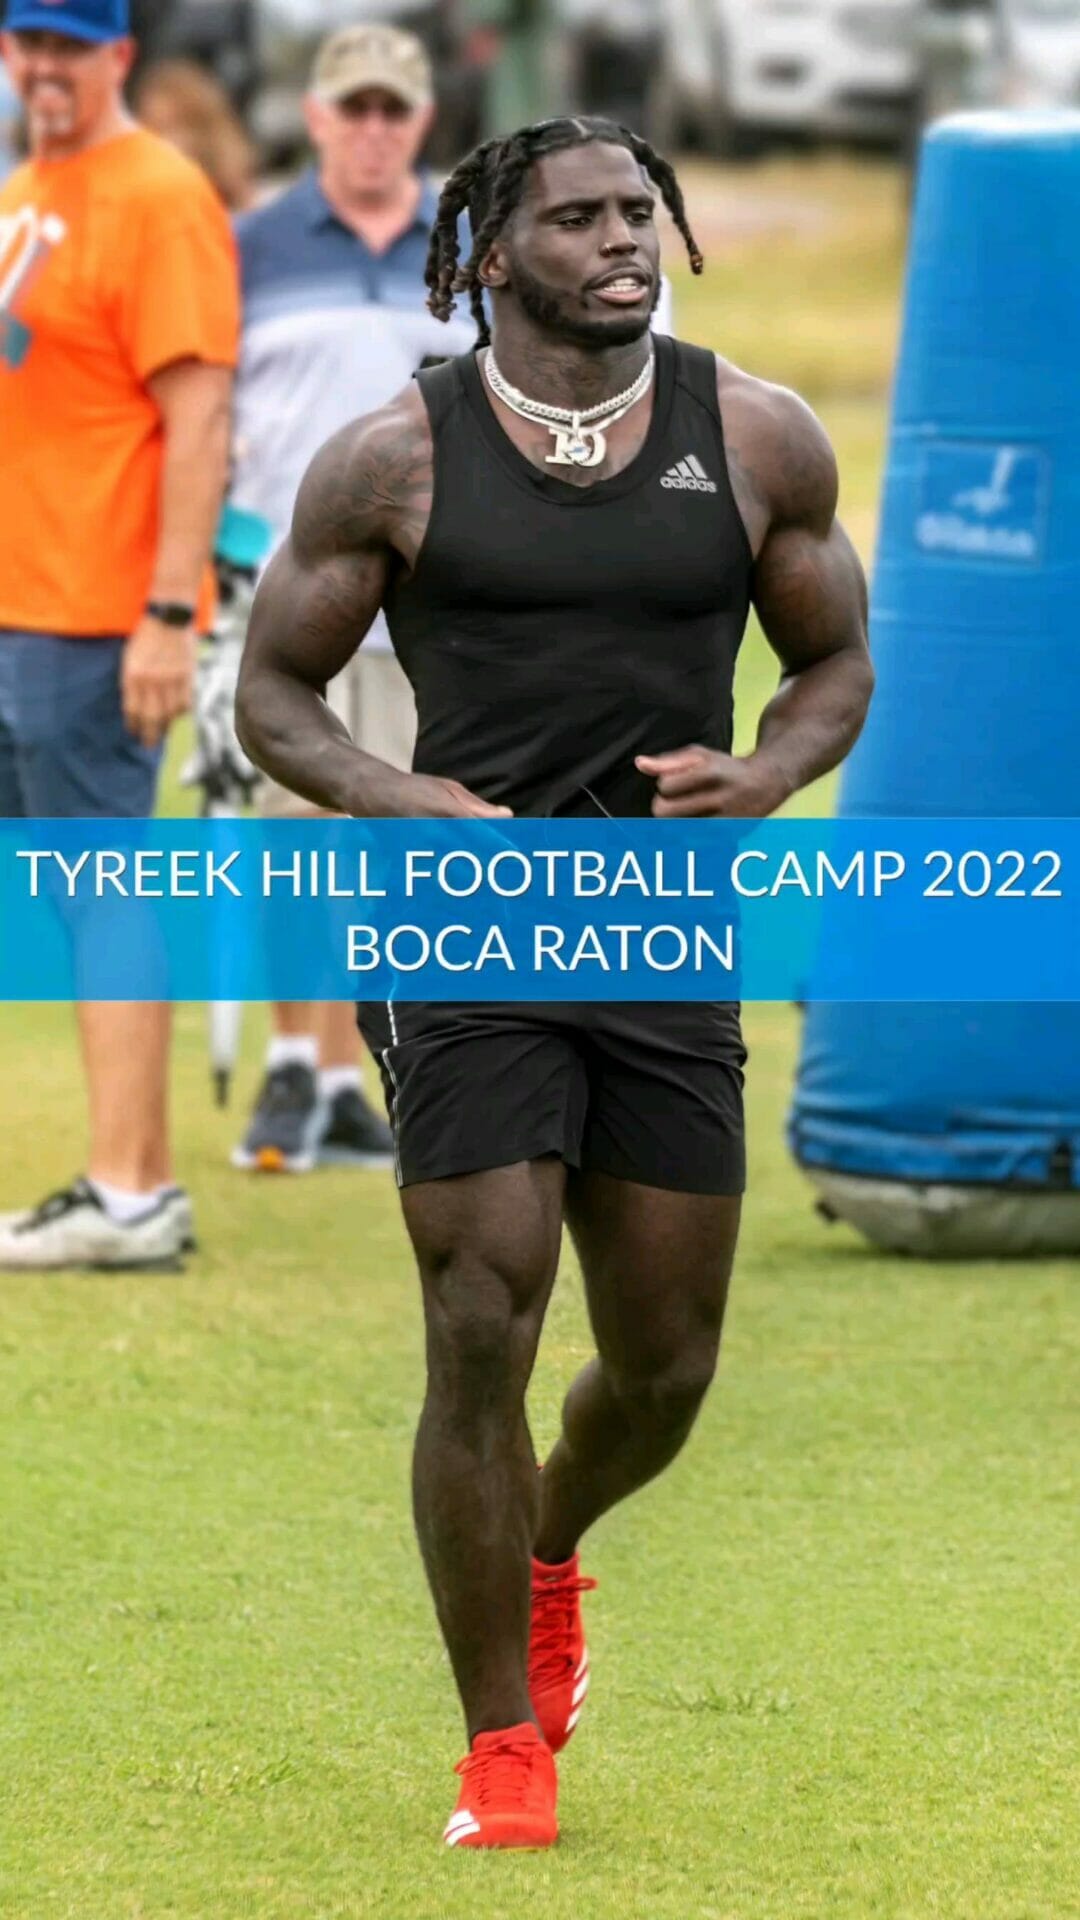 So excited to have shot the Tyreek Hill football camp in Boca Raton a few weeks ago for @denisemadan 
.
.
.
.
.
#bocaratonliving
#bocaratonfl
#bocaratonflorida
#bocaratonlife
#bocaratonliving
#bocaratonphotographer
#bocaratonphotography
#downtownboca
#exploreflorida
#florida_greatshots
#floridalife
#floridaliving
#southfloridaphotographer
#sunshinestate
#sunshinestateofmind
#visitflorida
#westpalmbeachphotographer
#palmbeachphotographer
@cheetah 
@flexworkmgt